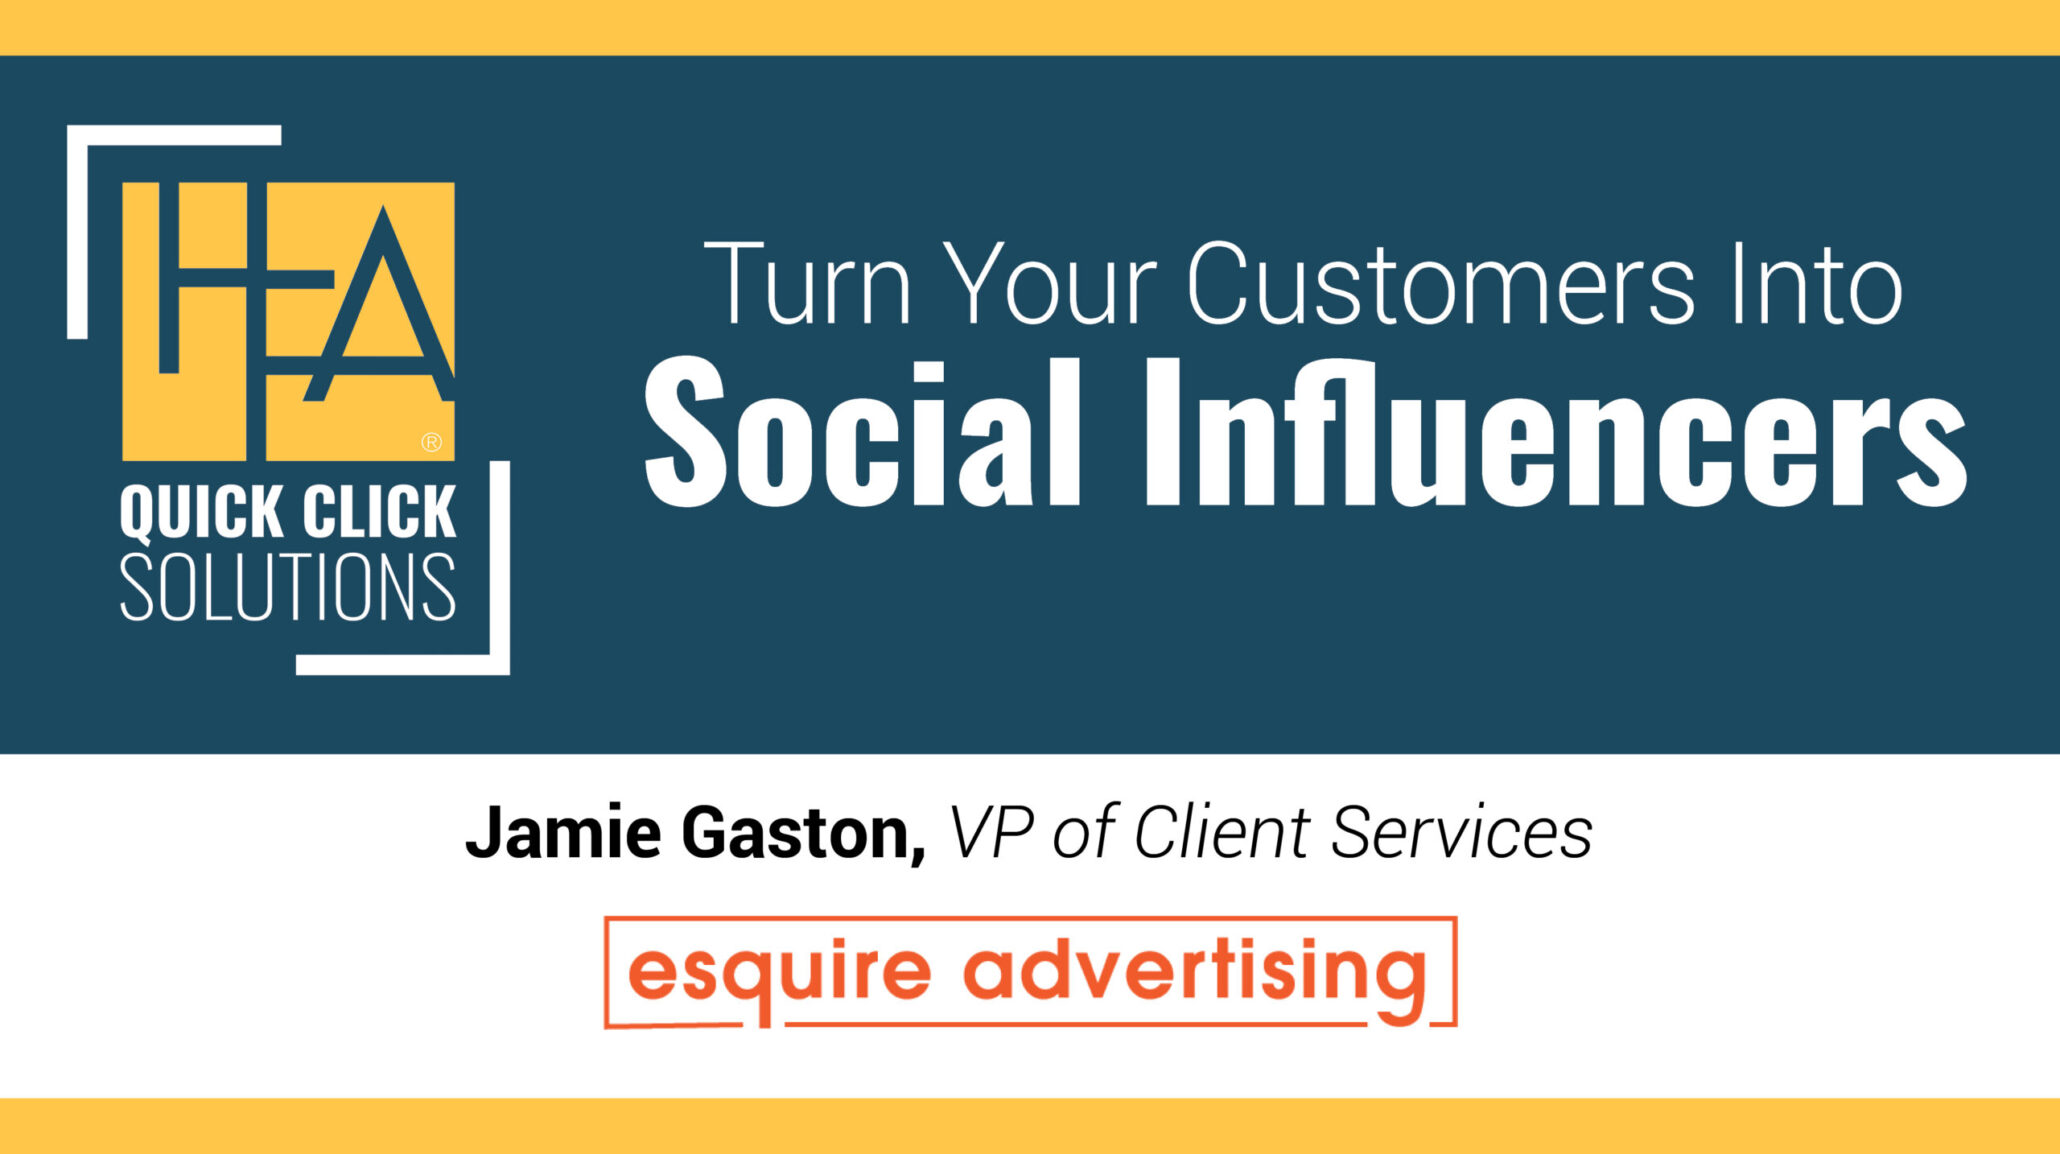 HFA-QCS-Turn Your Customers Into Social Influencers